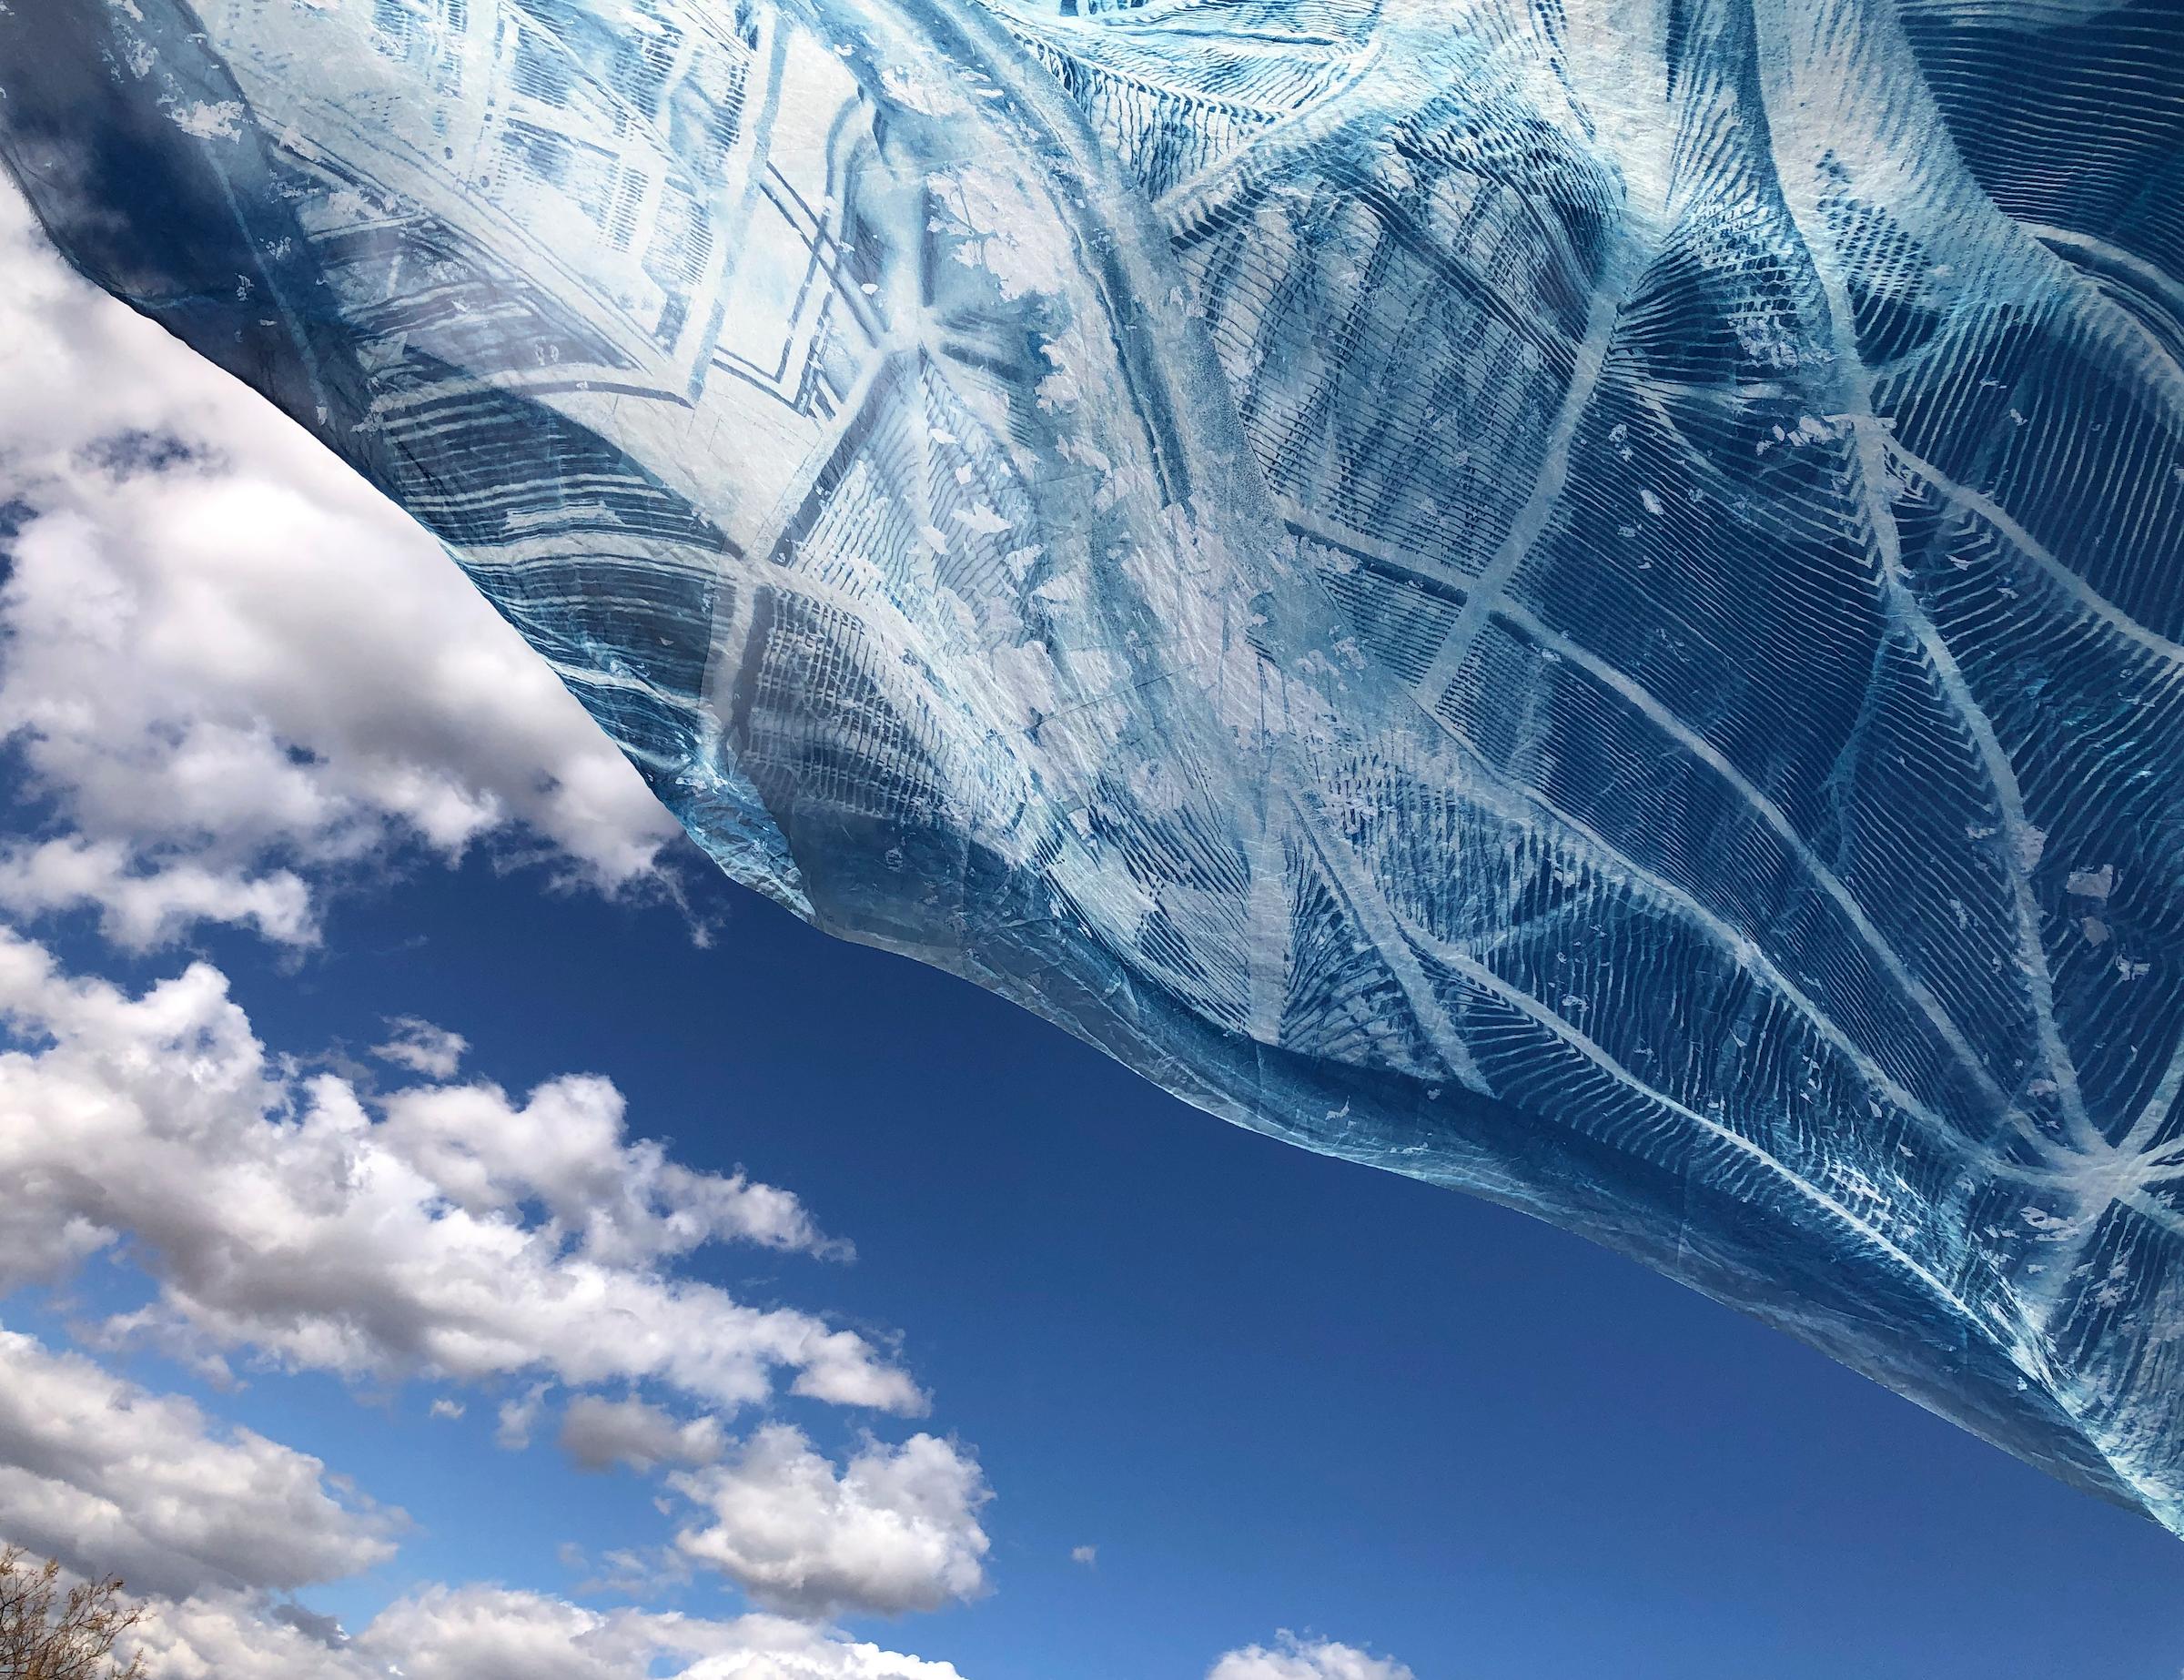 "Rising 3", contemporary, abstract, sky, clouds, blue, cyanotype, photograph - Photograph by Marie Craig